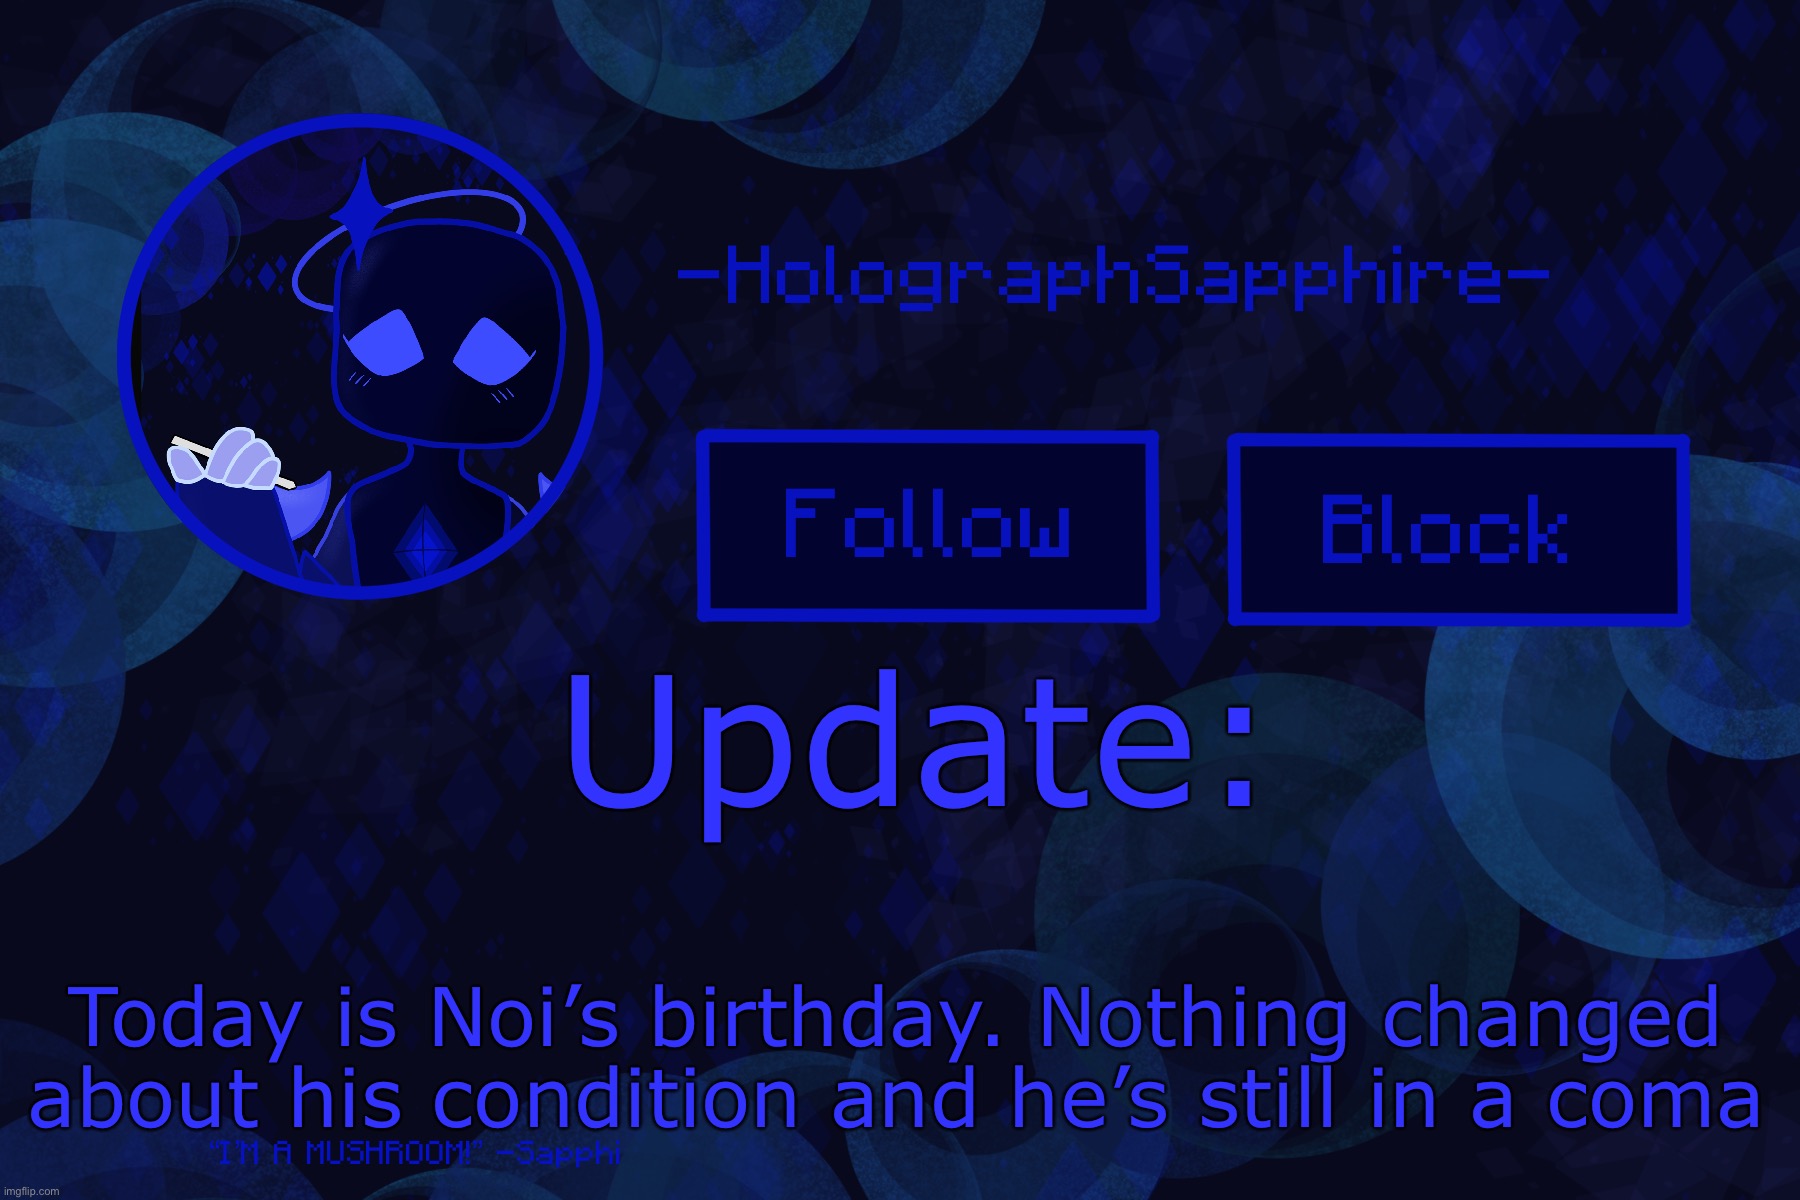 GO WISH HIM A HAPPY BIRTHDAY NOWWWWWWW!!!!!!! | Update:; Today is Noi’s birthday. Nothing changed about his condition and he’s still in a coma | image tagged in -holographsapphire- s announcement template | made w/ Imgflip meme maker